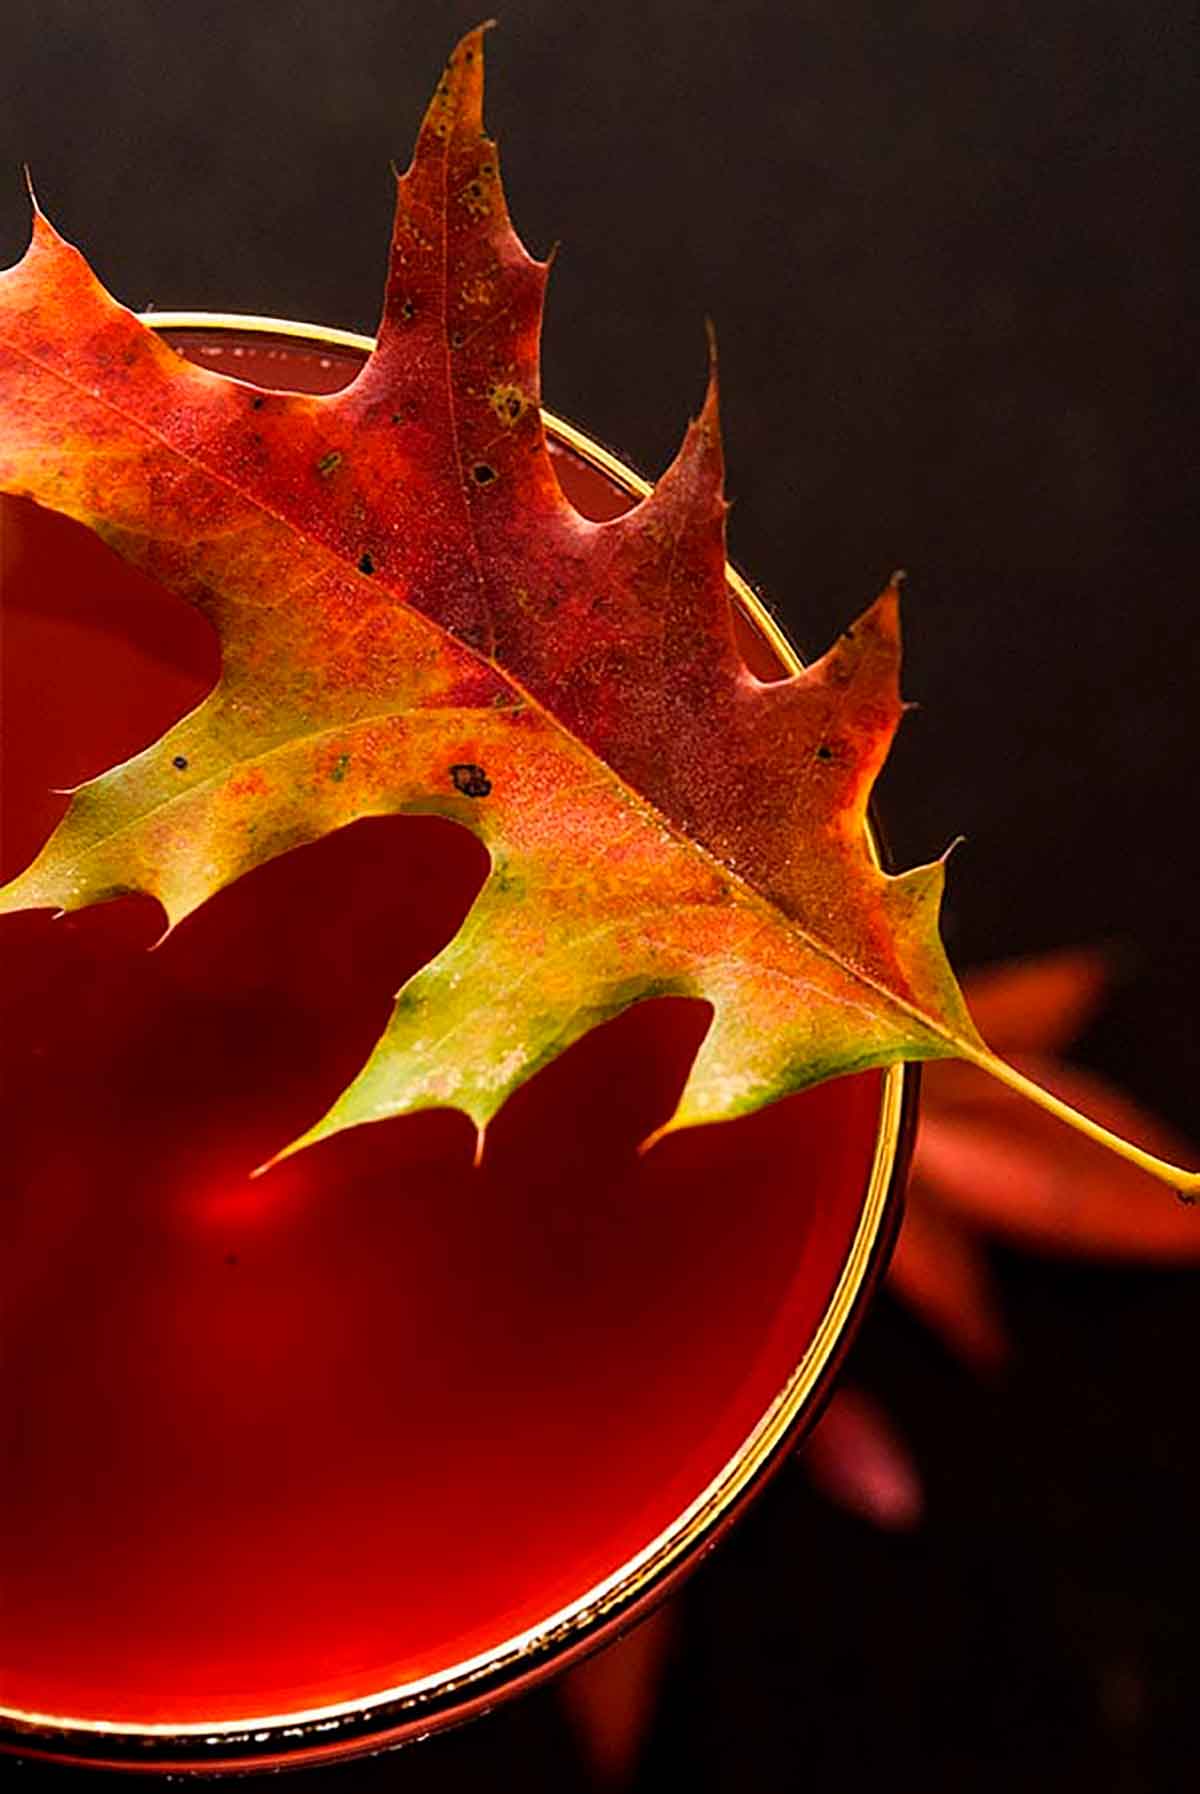 An autumn leaf on top of a red cocktail as garnish.